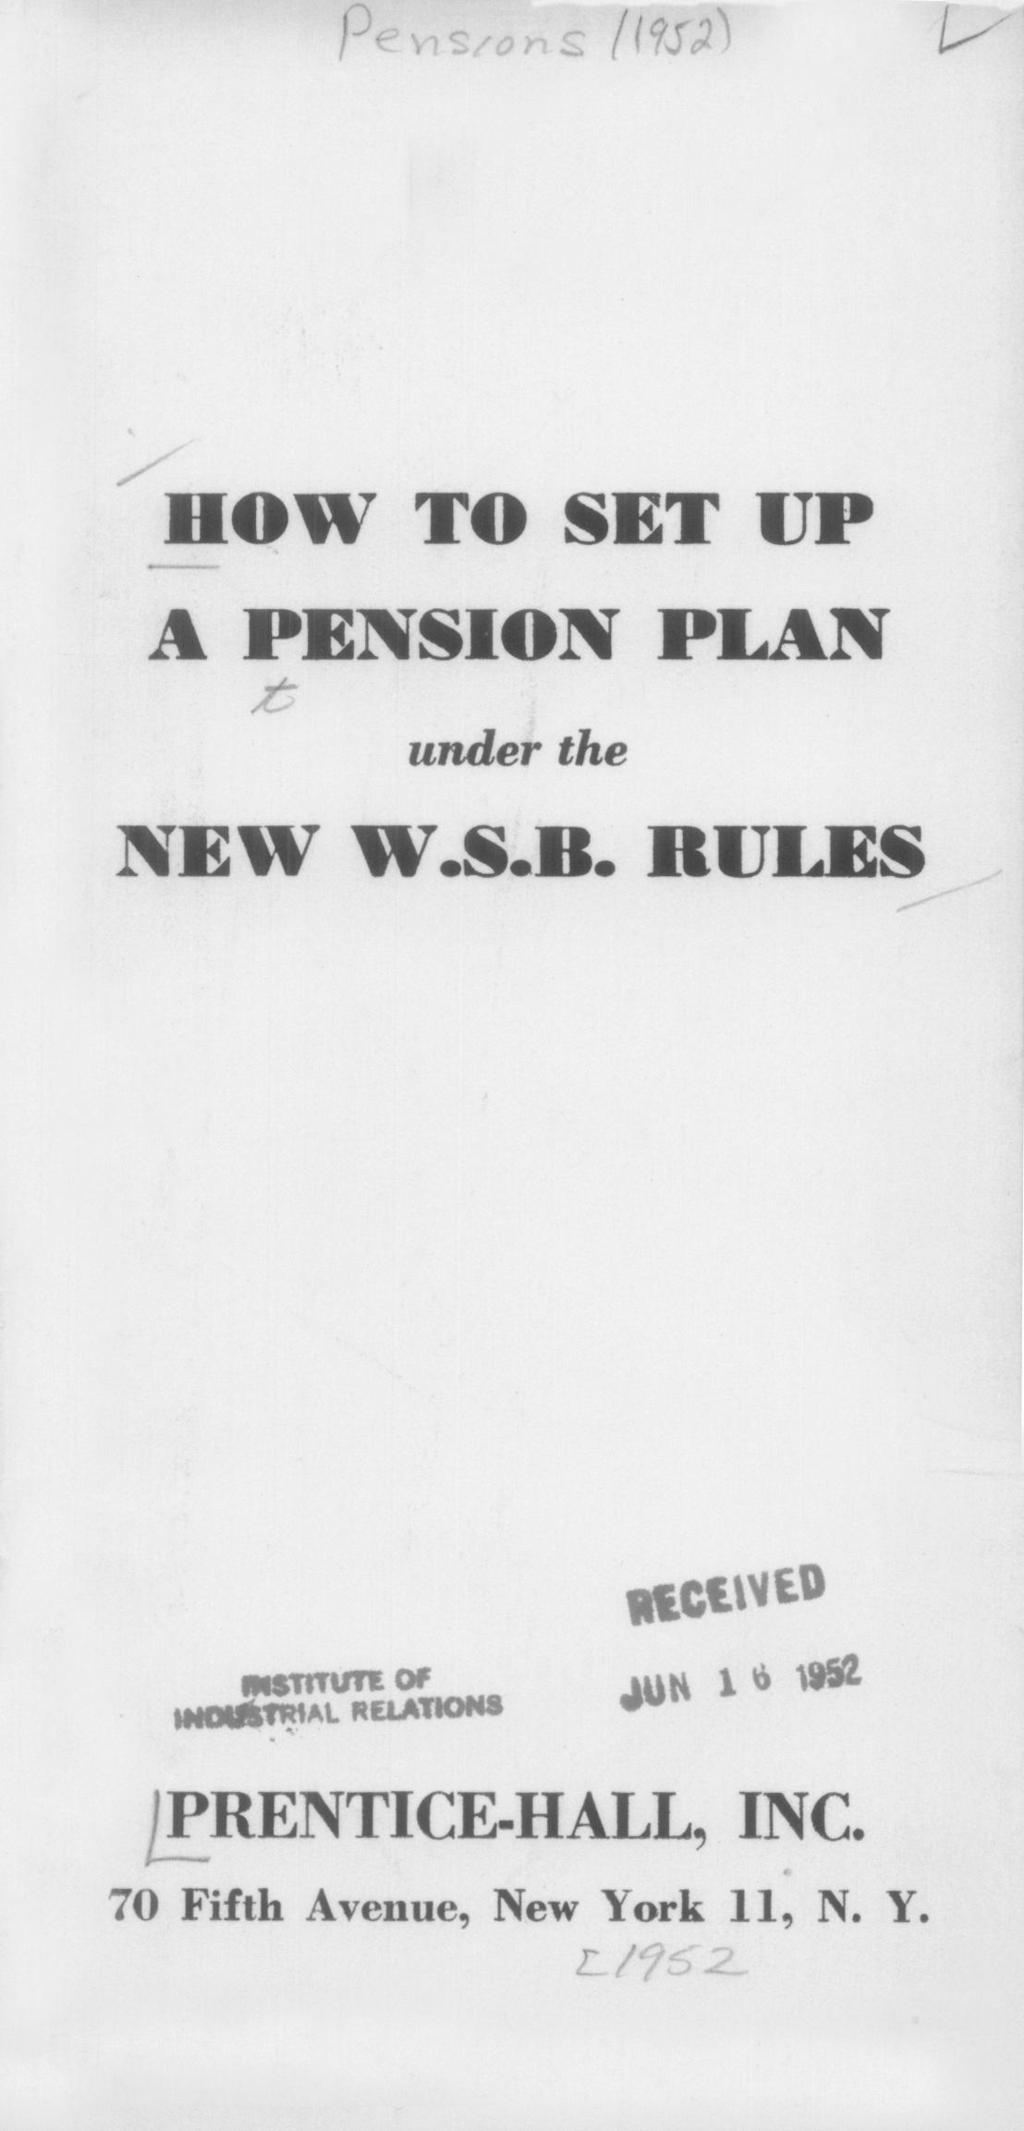 HOW TO SET UP A PENSION PLAN under the NEW W.S.B. RULES p.gm;m OF AU t 6 *.